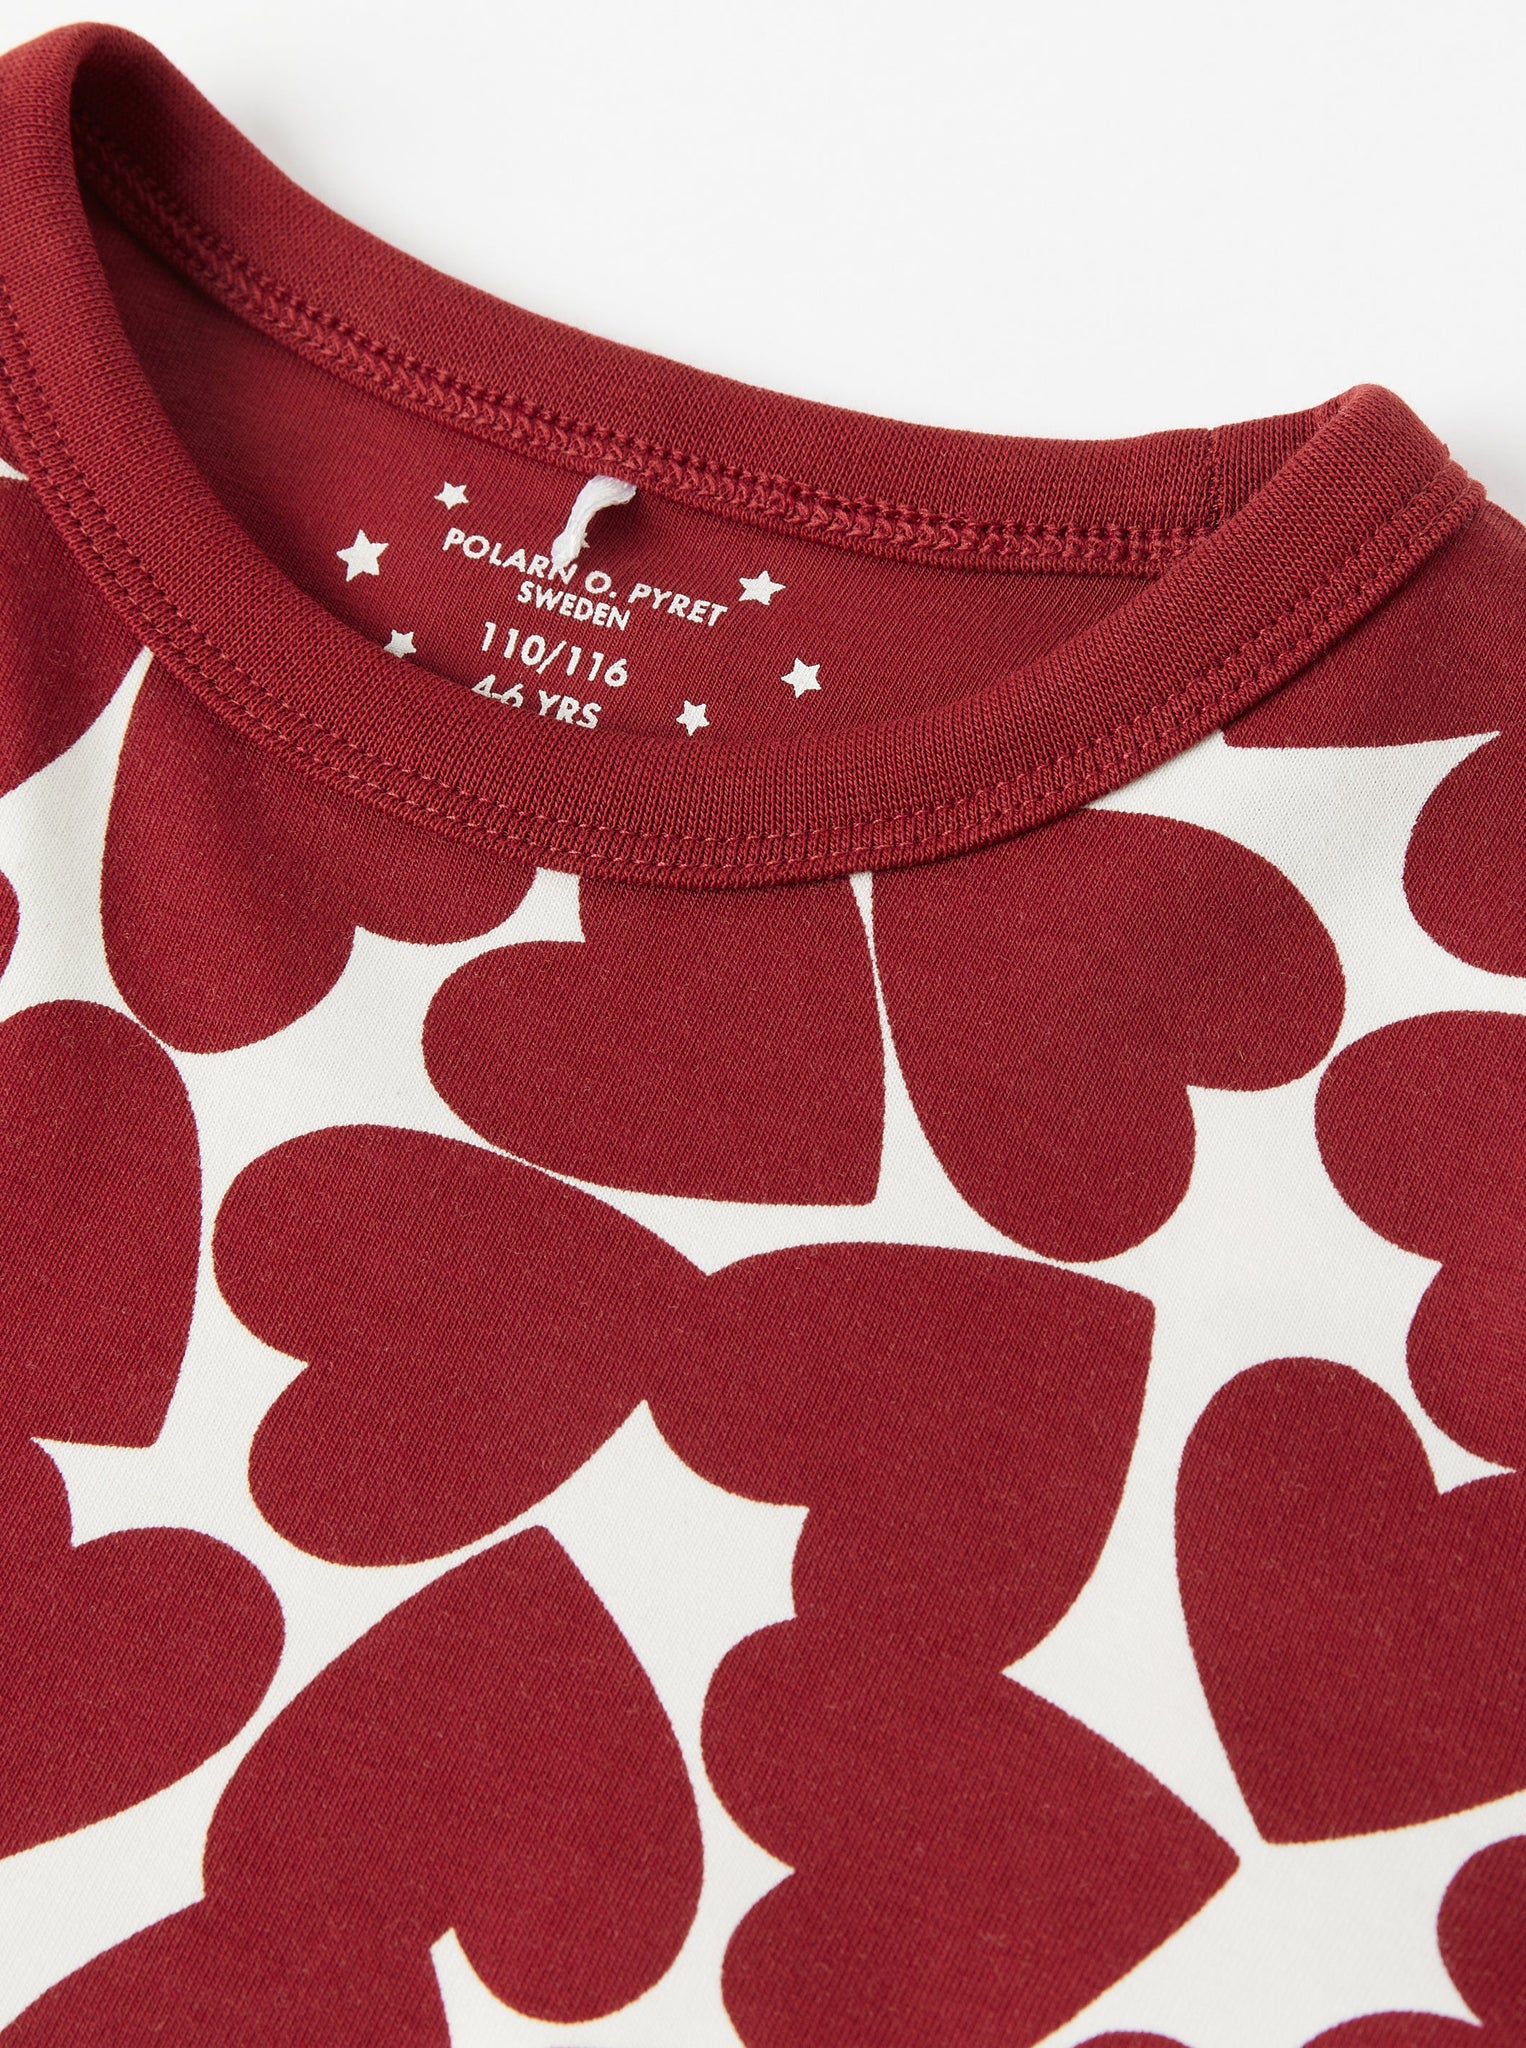 Cotton Red Heart Print Kids Pyjamas from the Polarn O. Pyret kidswear collection. Ethically produced kids clothing.